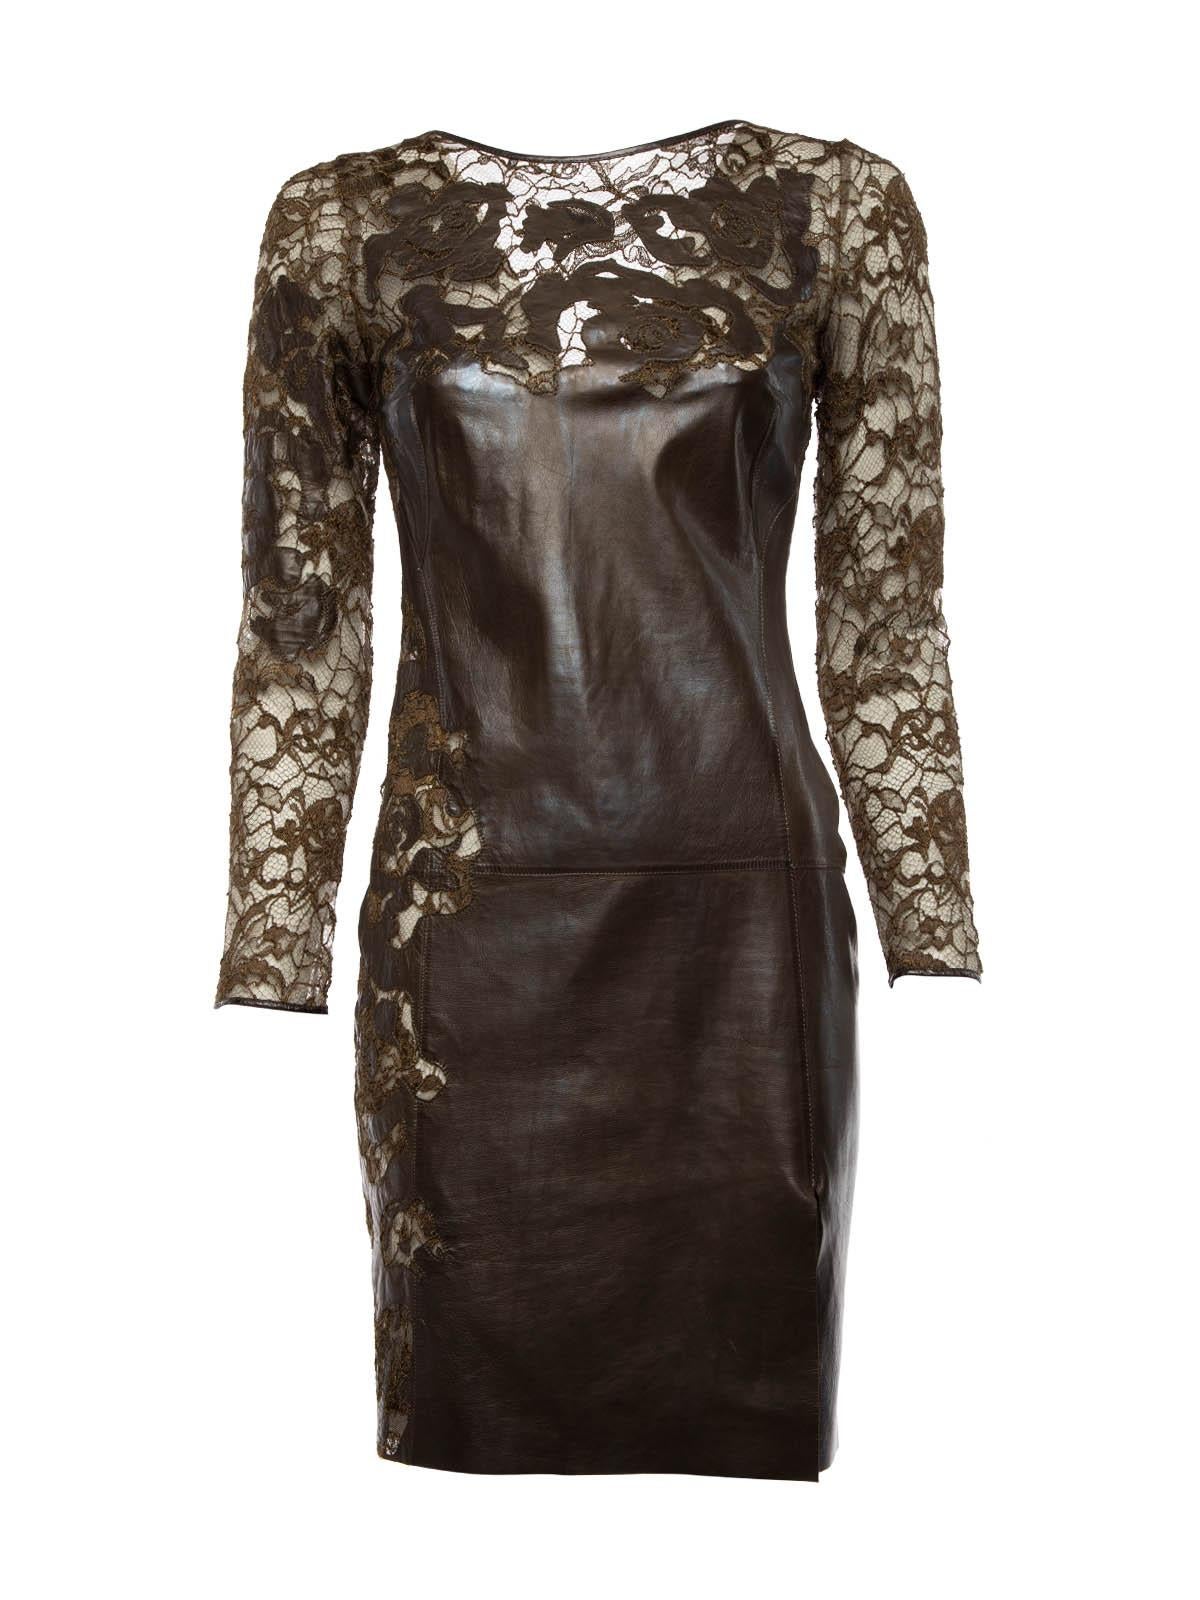 Emilio Pucci Women's Leather and Lace Long Sleeved Dress